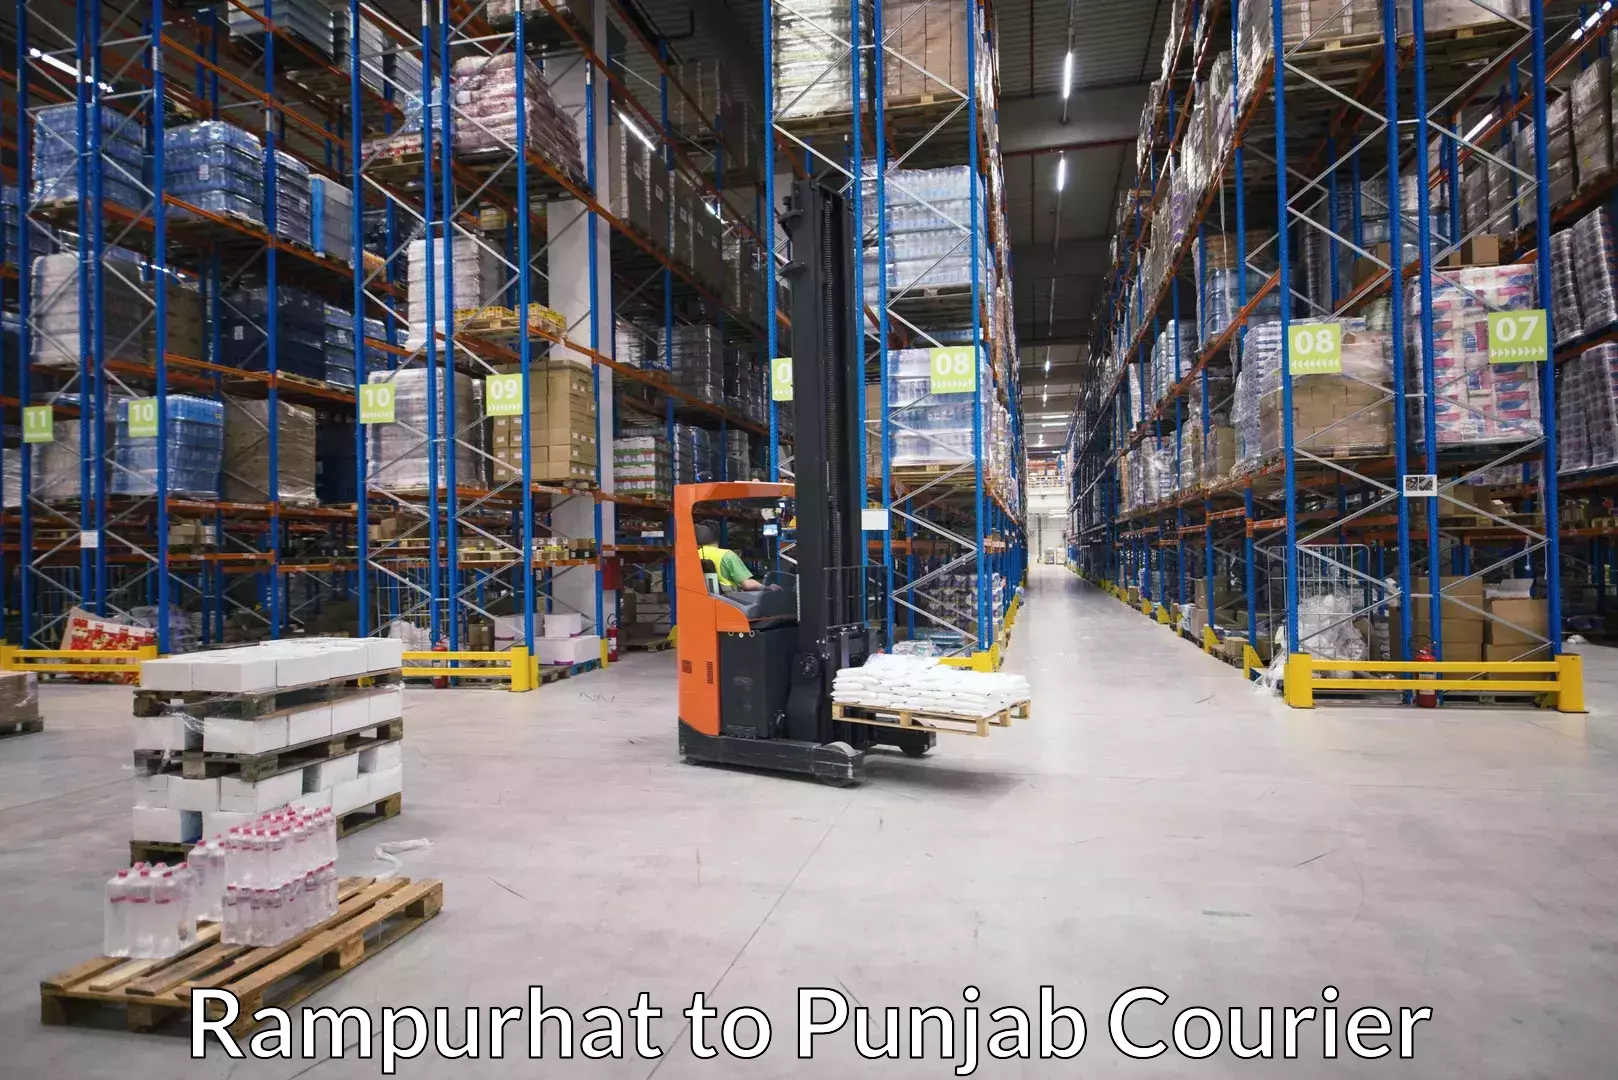 Baggage shipping experts Rampurhat to Ludhiana